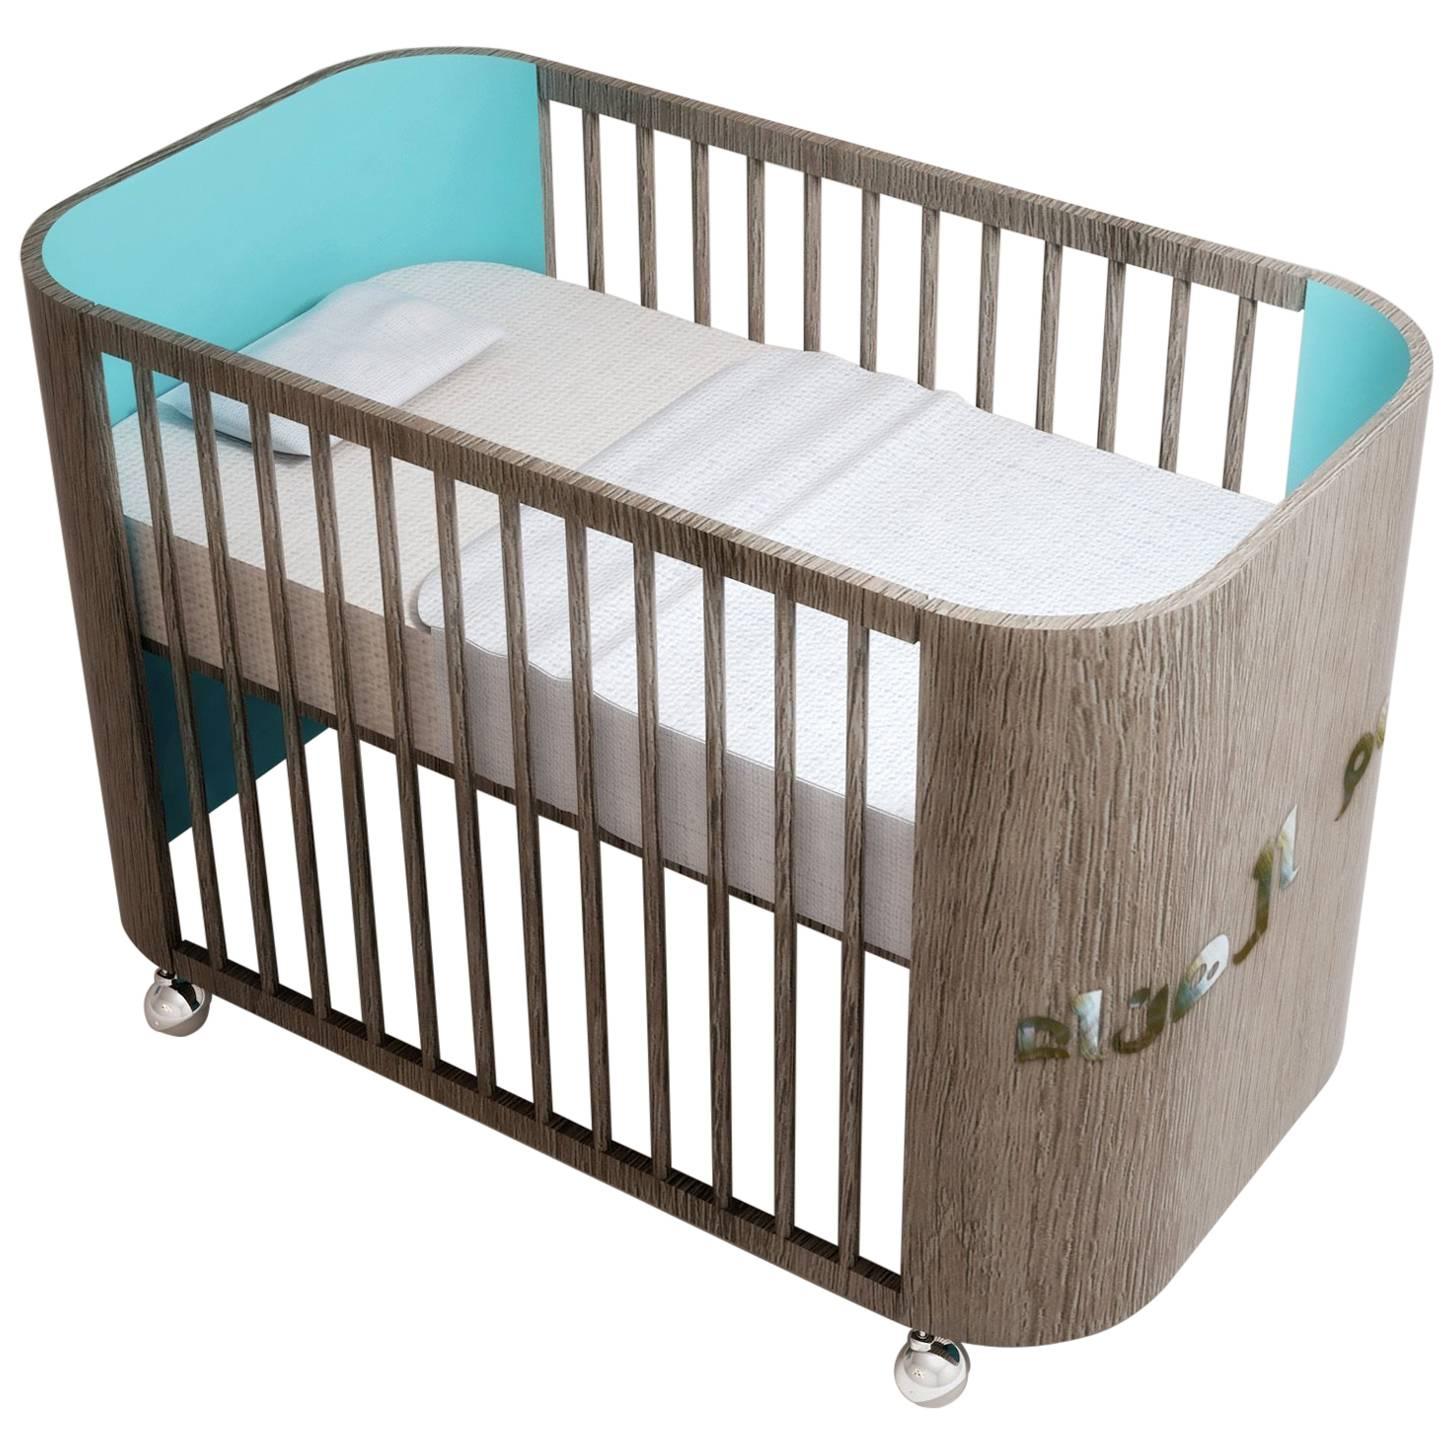 Embrace Dreams Crib in French Grey Wood and Turquoise by Misk Nursery For Sale